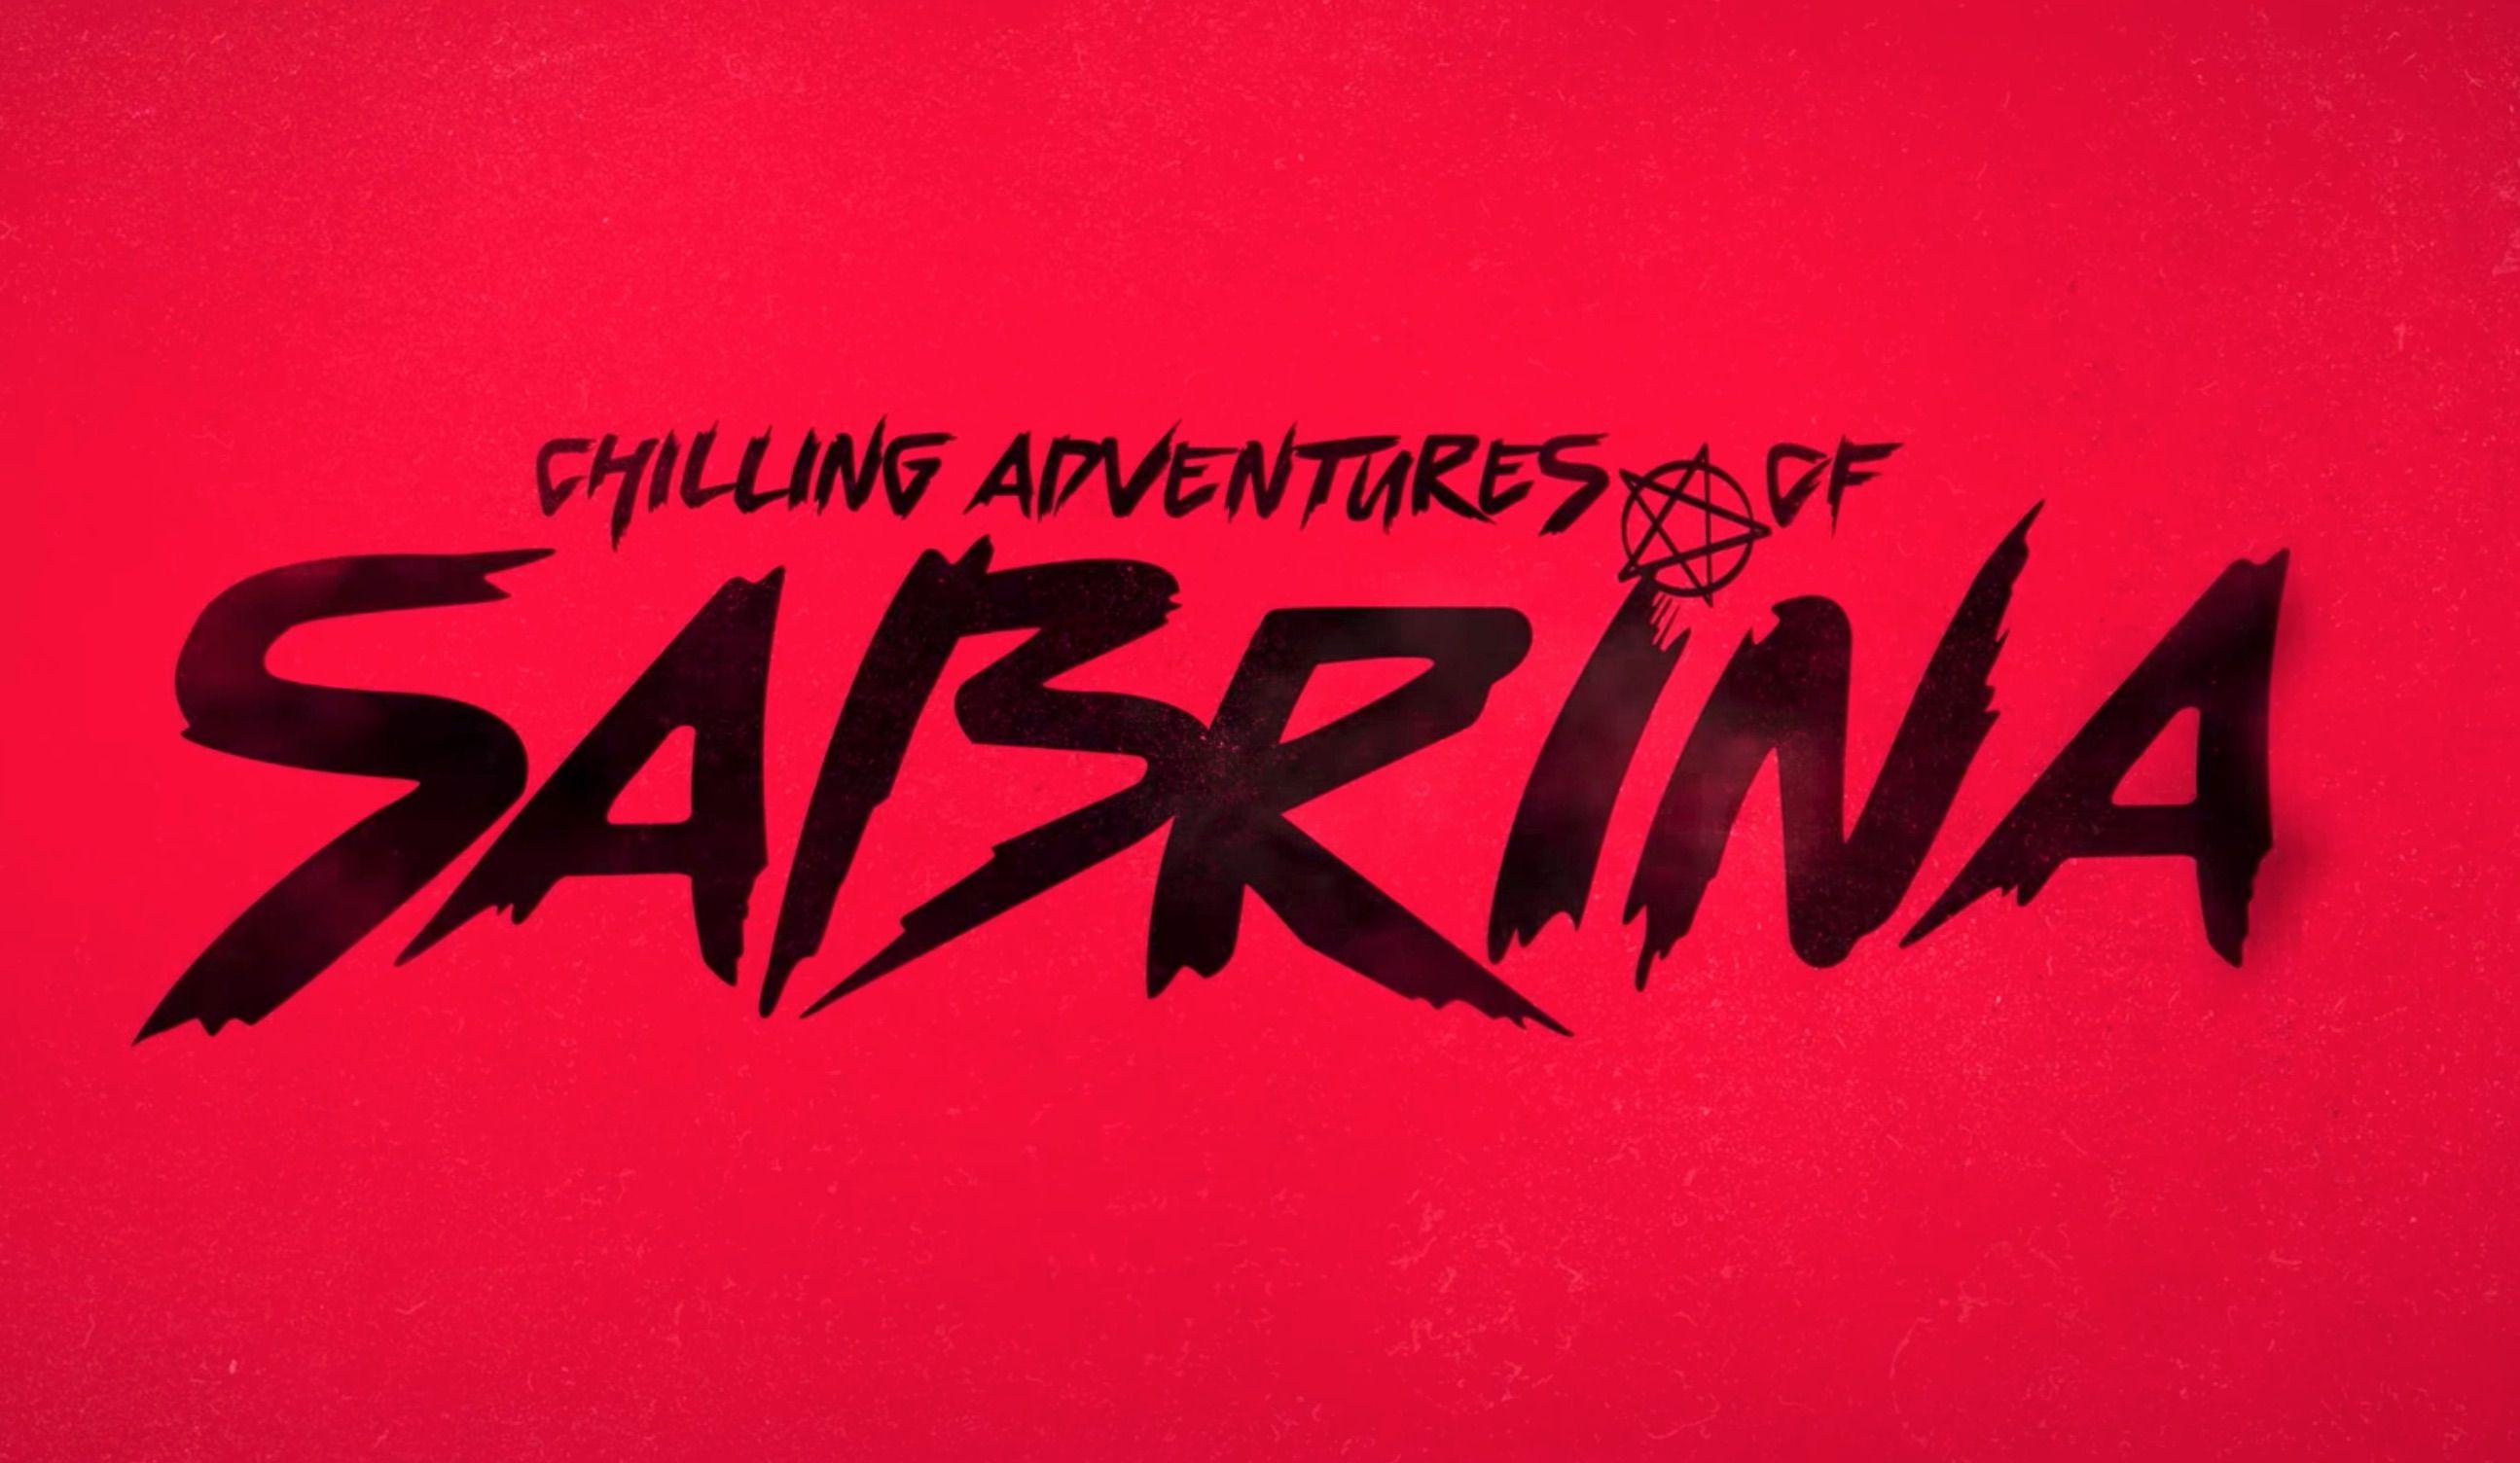 The Chilling Adventures Of Sabrina Wallpapers - Wallpaper Cave